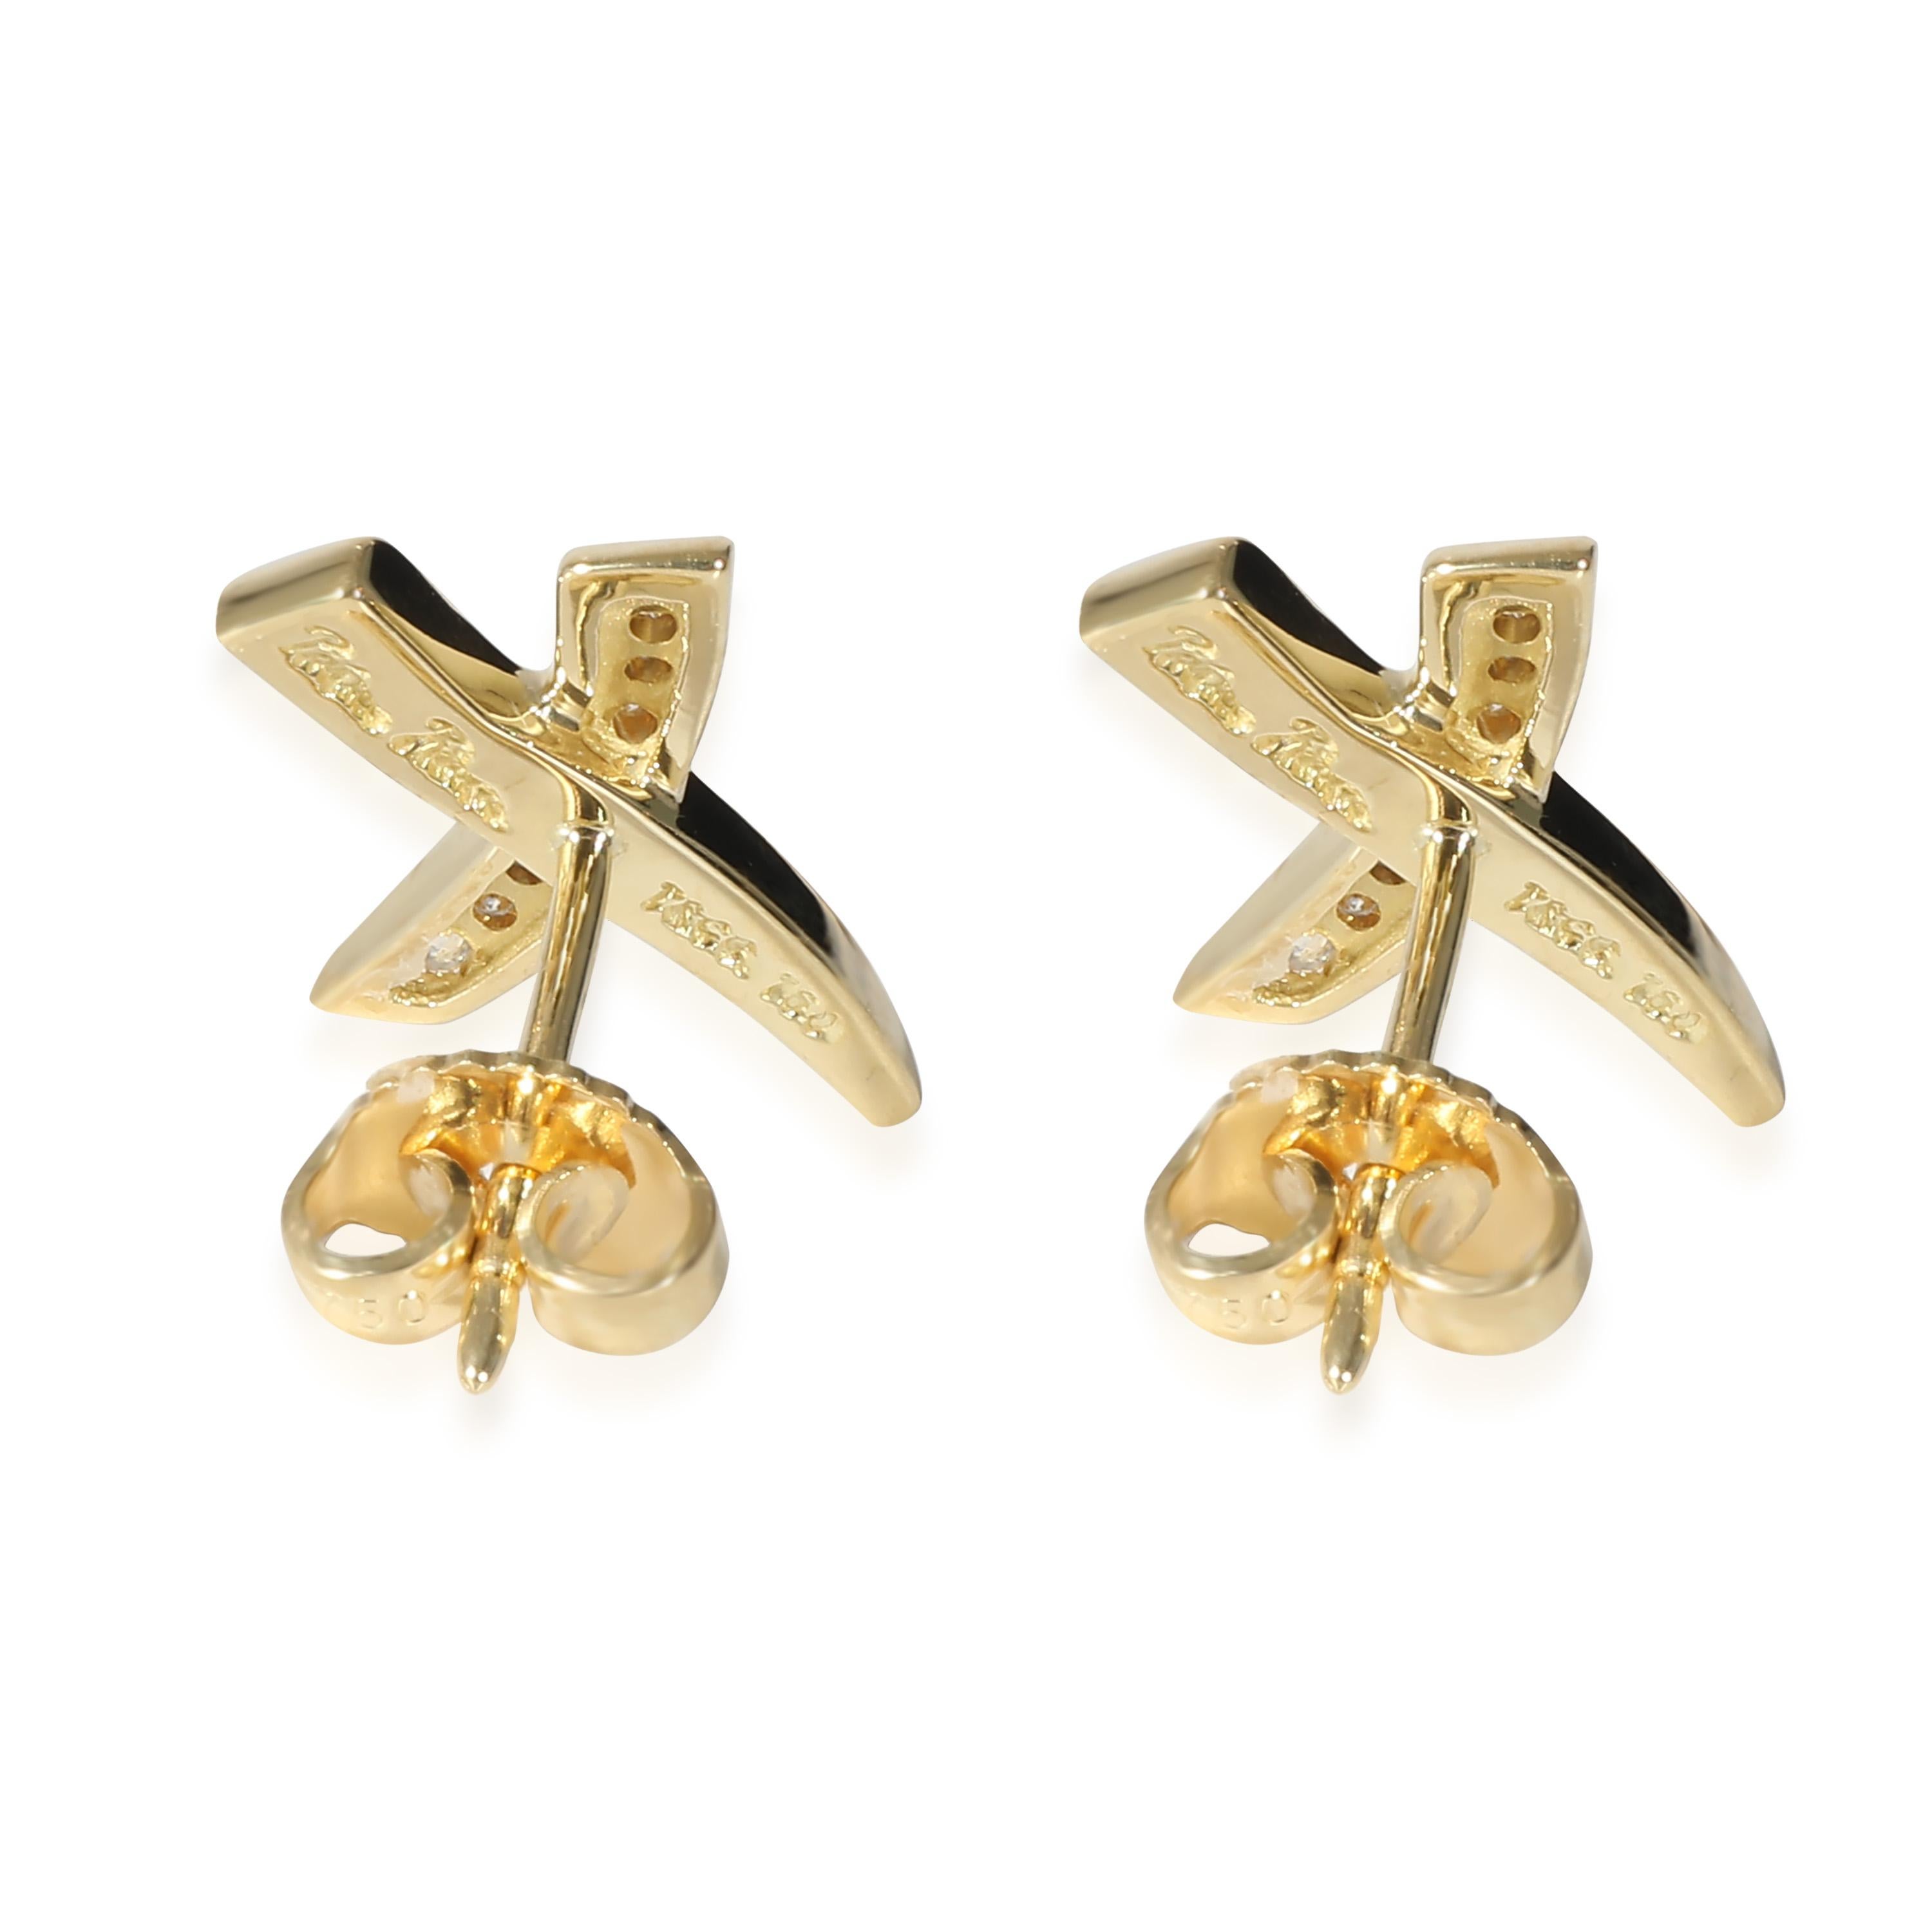 Tiffany & Co. Paloma Picasso X Graffiti Diamond Earrings, 18K Yellow Gold 0.1CTW

PRIMARY DETAILS
SKU: 135334
Listing Title: Tiffany & Co. Paloma Picasso X Graffiti Diamond Earrings, 18K Yellow Gold 0.1CTW
Condition Description: The daughter of